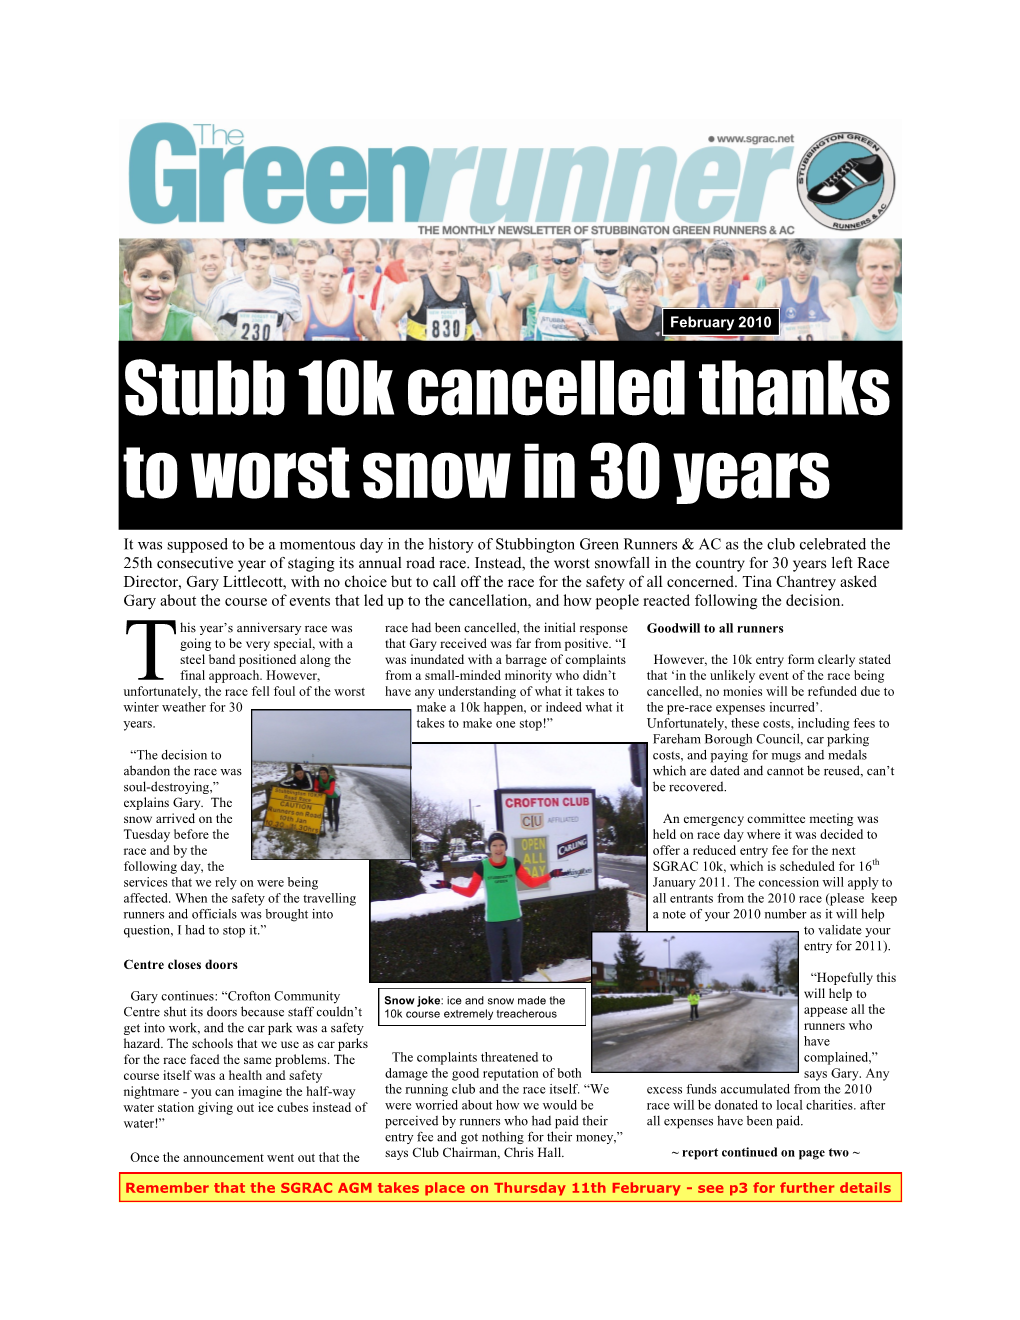 Stubb 10K Cancelled Thanks to Worst Snow in 30 Years